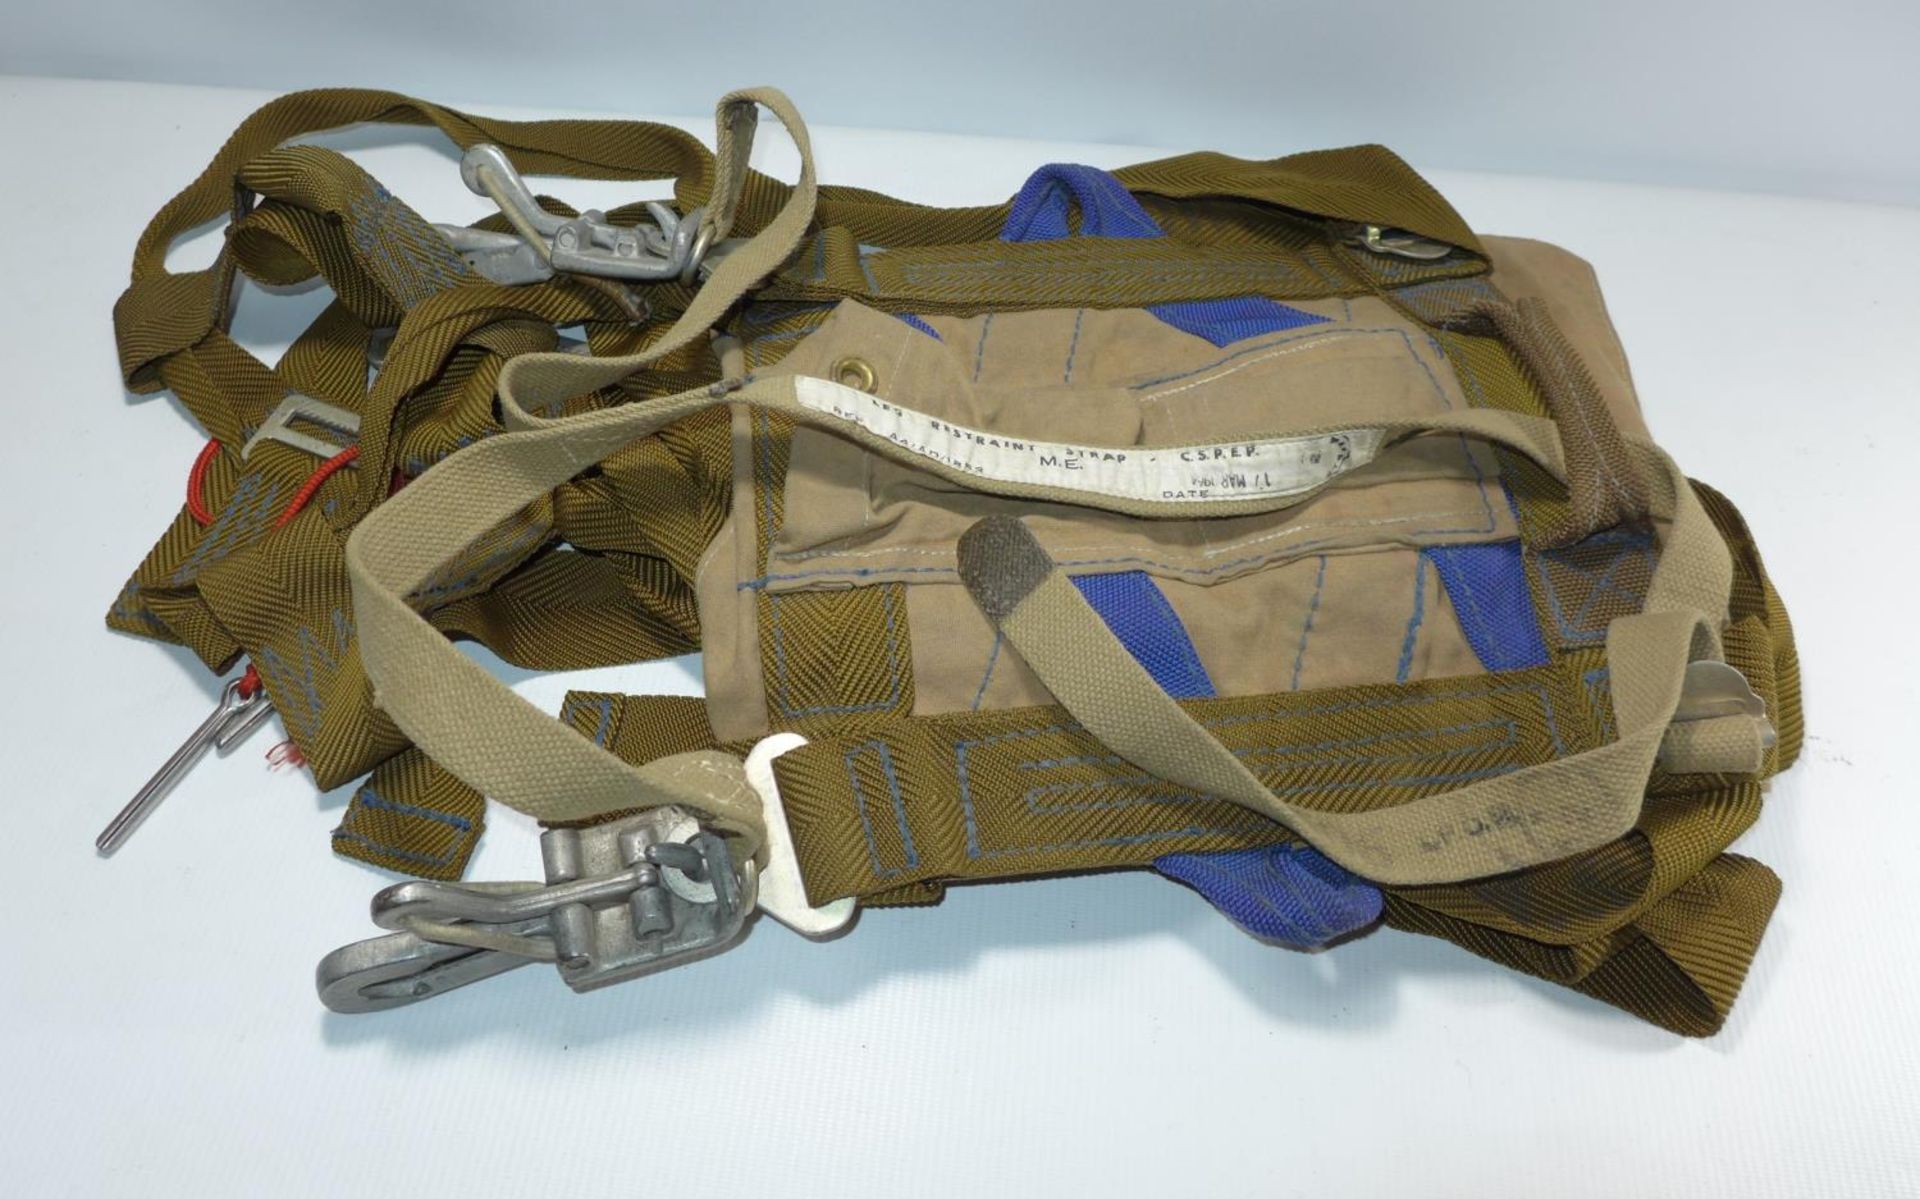 A PARACHUTE HARNESS, DATED 1964